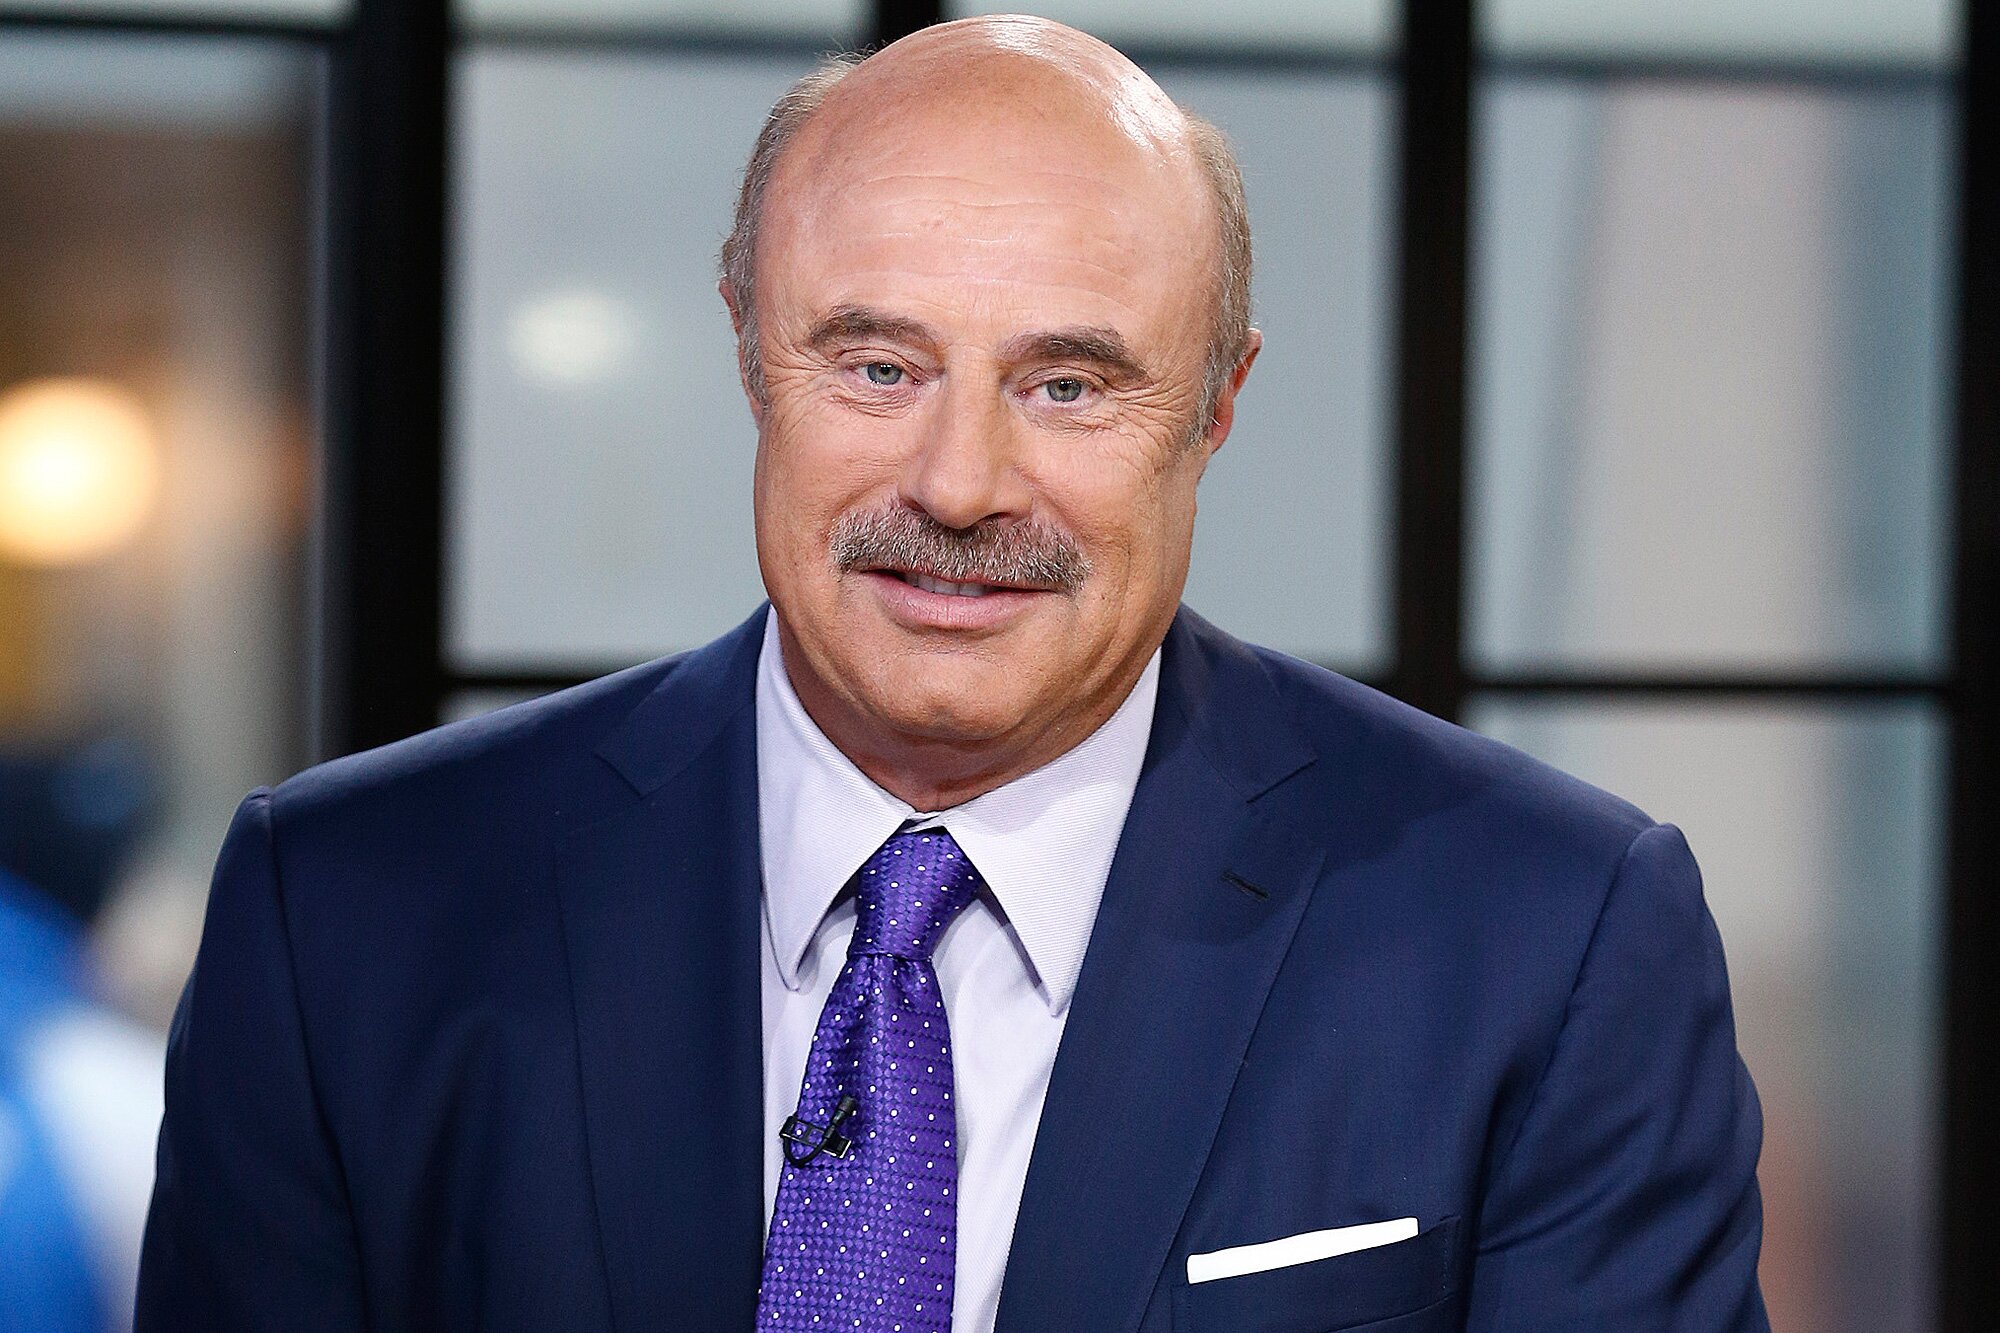 Dr. Phil Net Worth in 2022, Awards, Investments, Salary and Personal Life